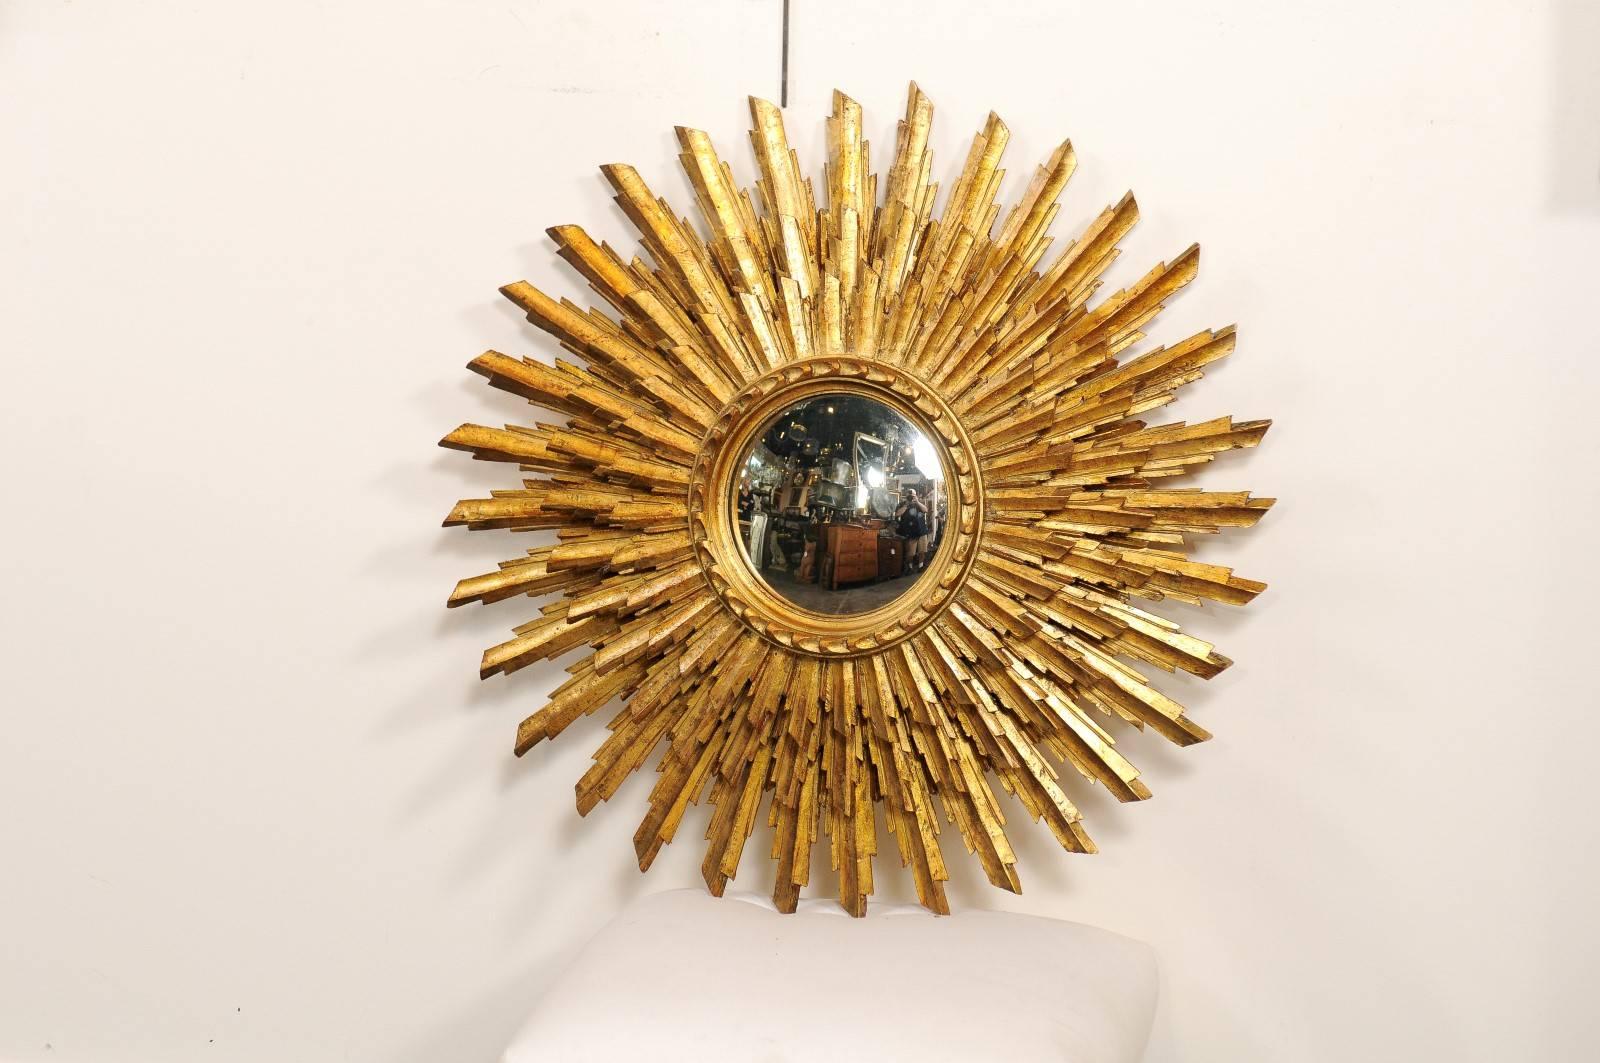 This French sunburst mirror from the mid-20th century features a small circular mirror in the centre, surrounded by three layers of giltwood radiating sunrays. The carved molding framing the mirror gives birth to the smallest sized sunrays, placed